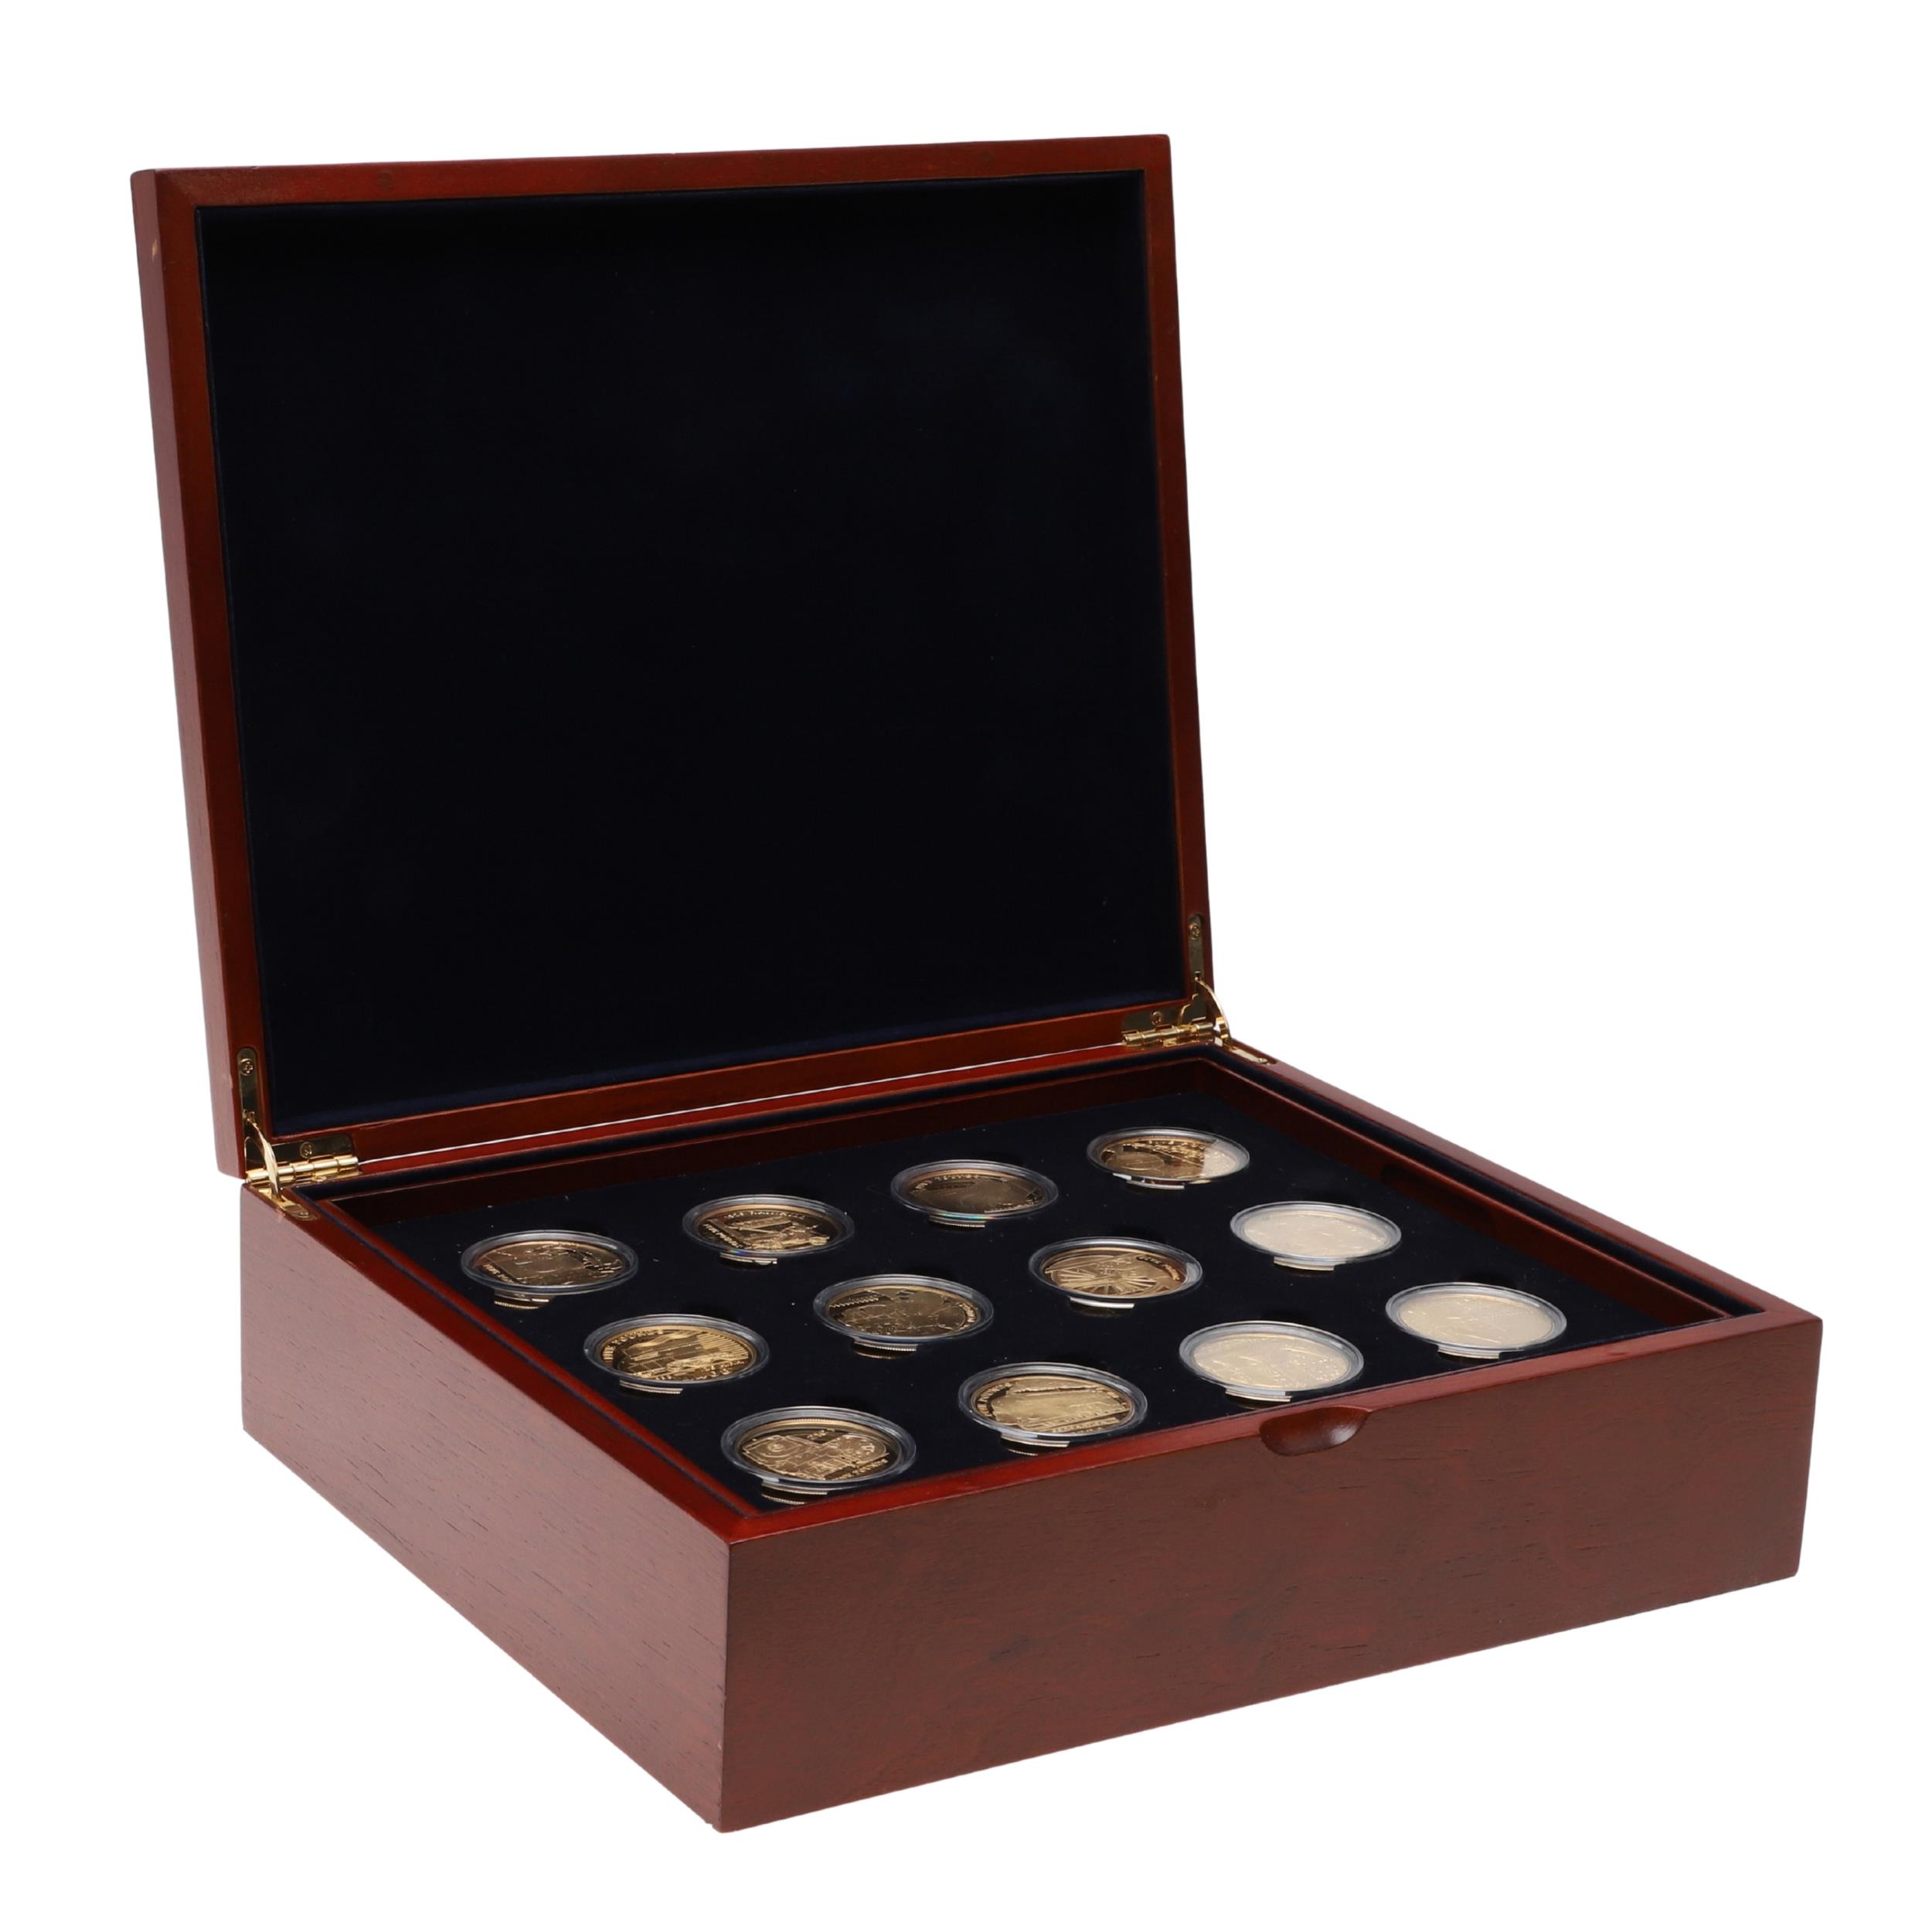 A ROYAL MINT 'THE GOLDEN STEAM AGE' COLLECTION OF 18 SILVER GILT PROOF COINS.